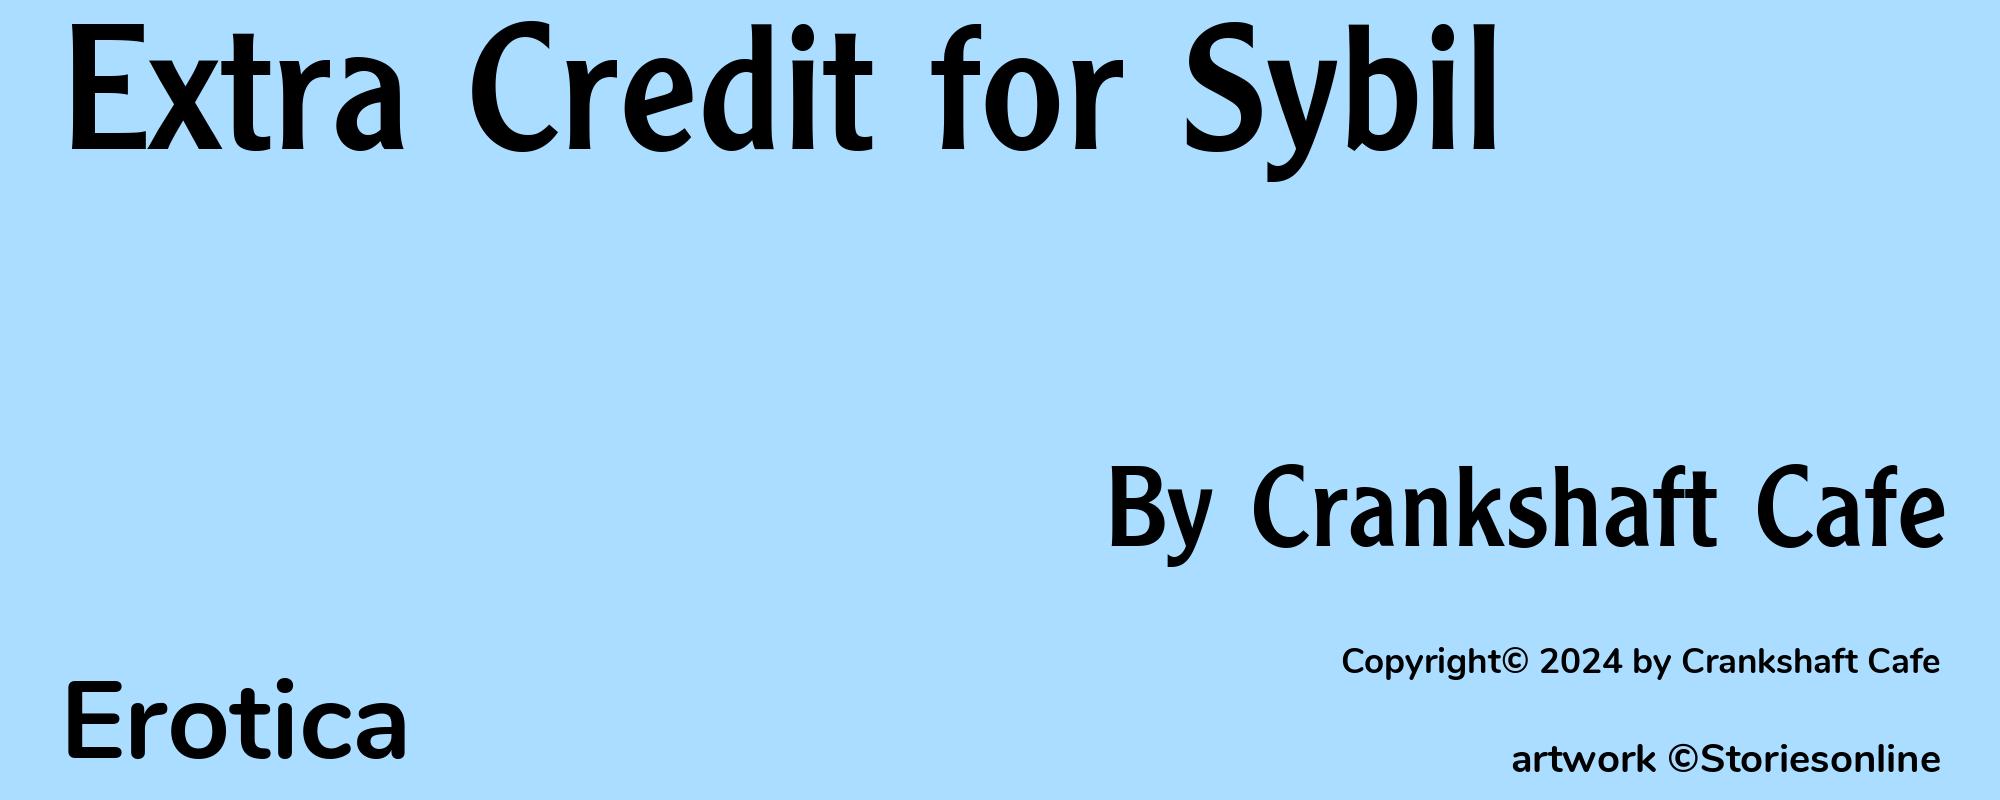 Extra Credit for Sybil - Cover